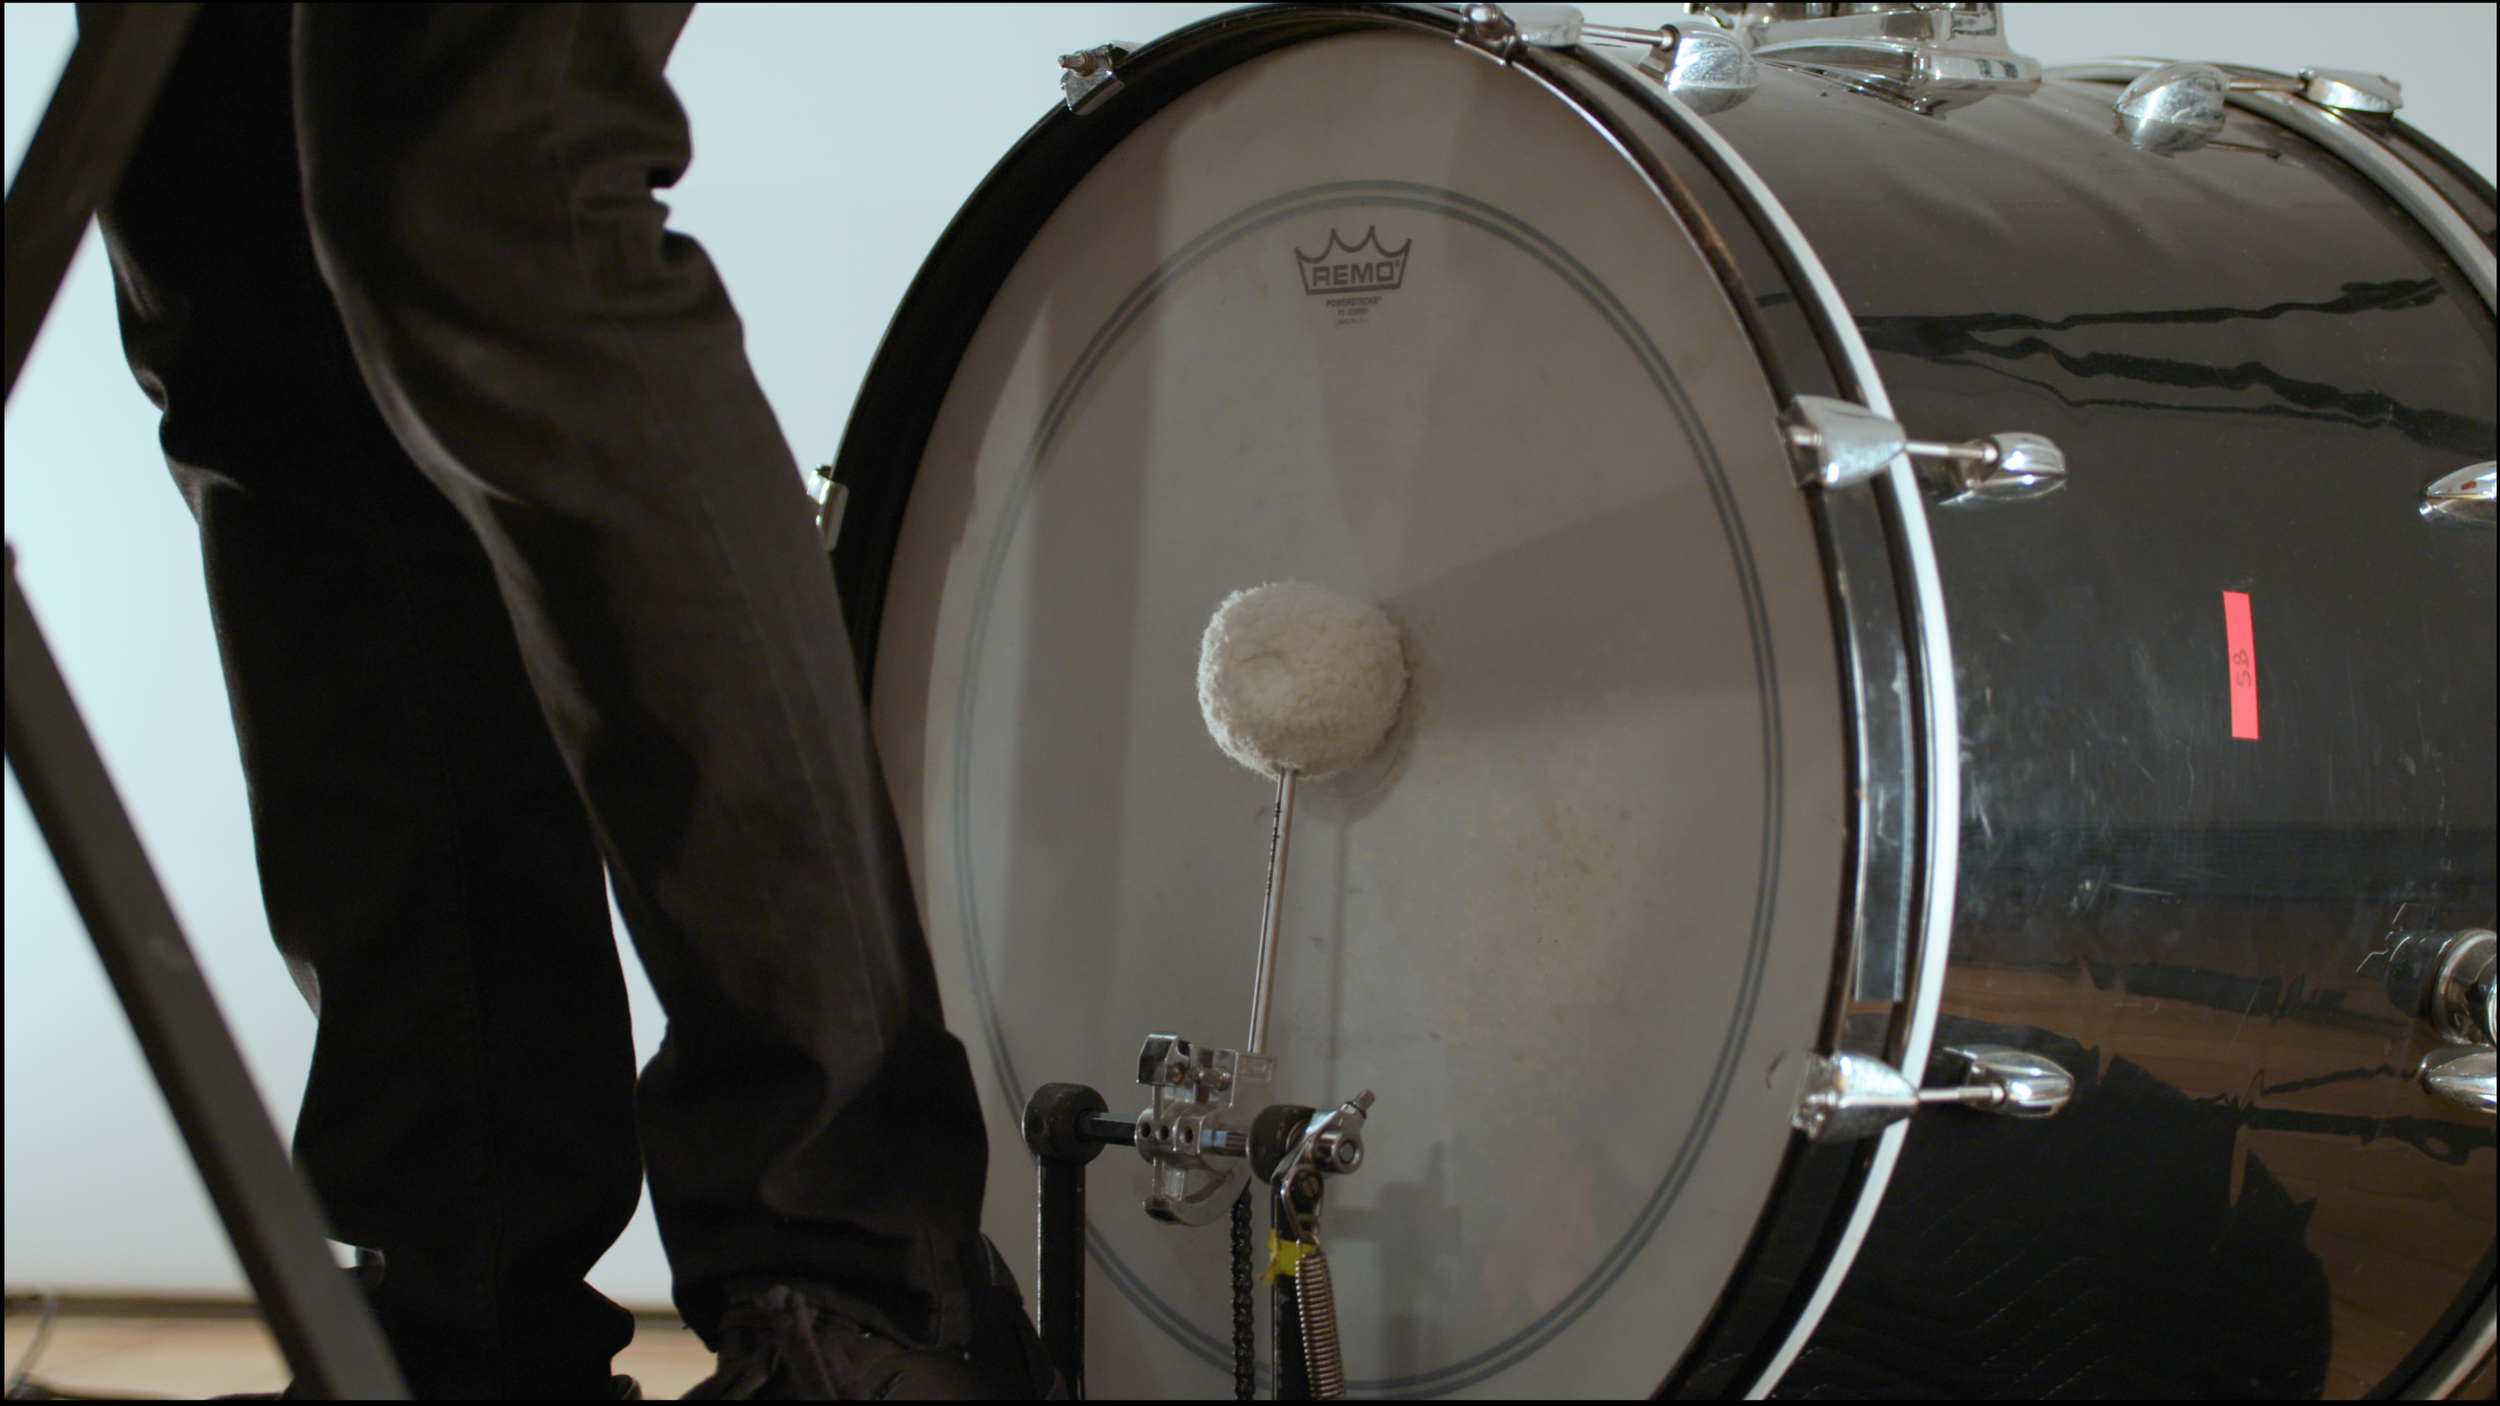 3. A close-up image of a percussionist playing a kick drum behind them with their foot.